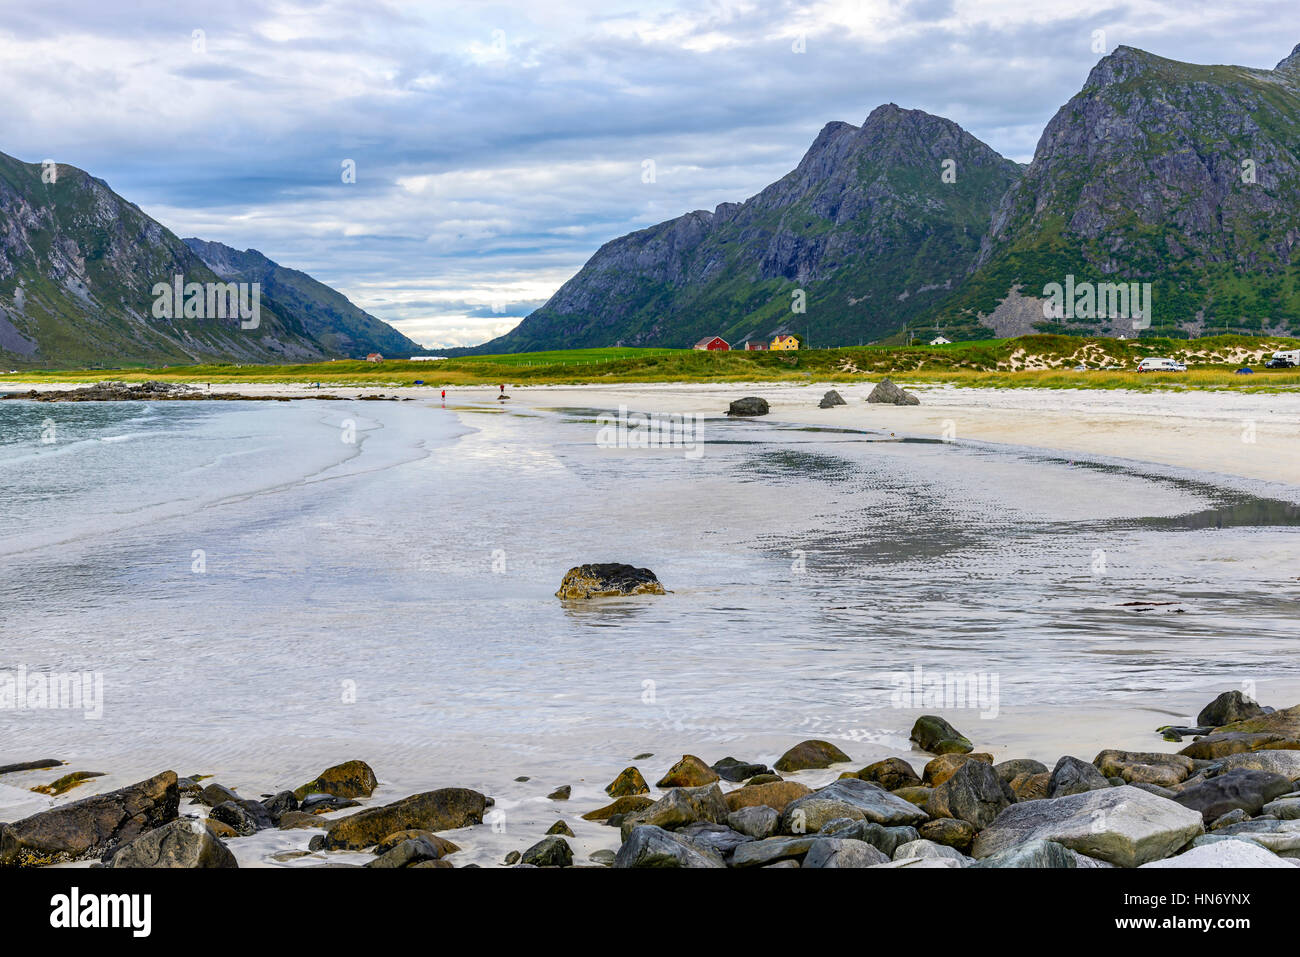 View of Skagsanden Beach, Norway. Skagsanden is one of Lofoten most photographed beaches, especially as a location for northern lights in winter. Stock Photo